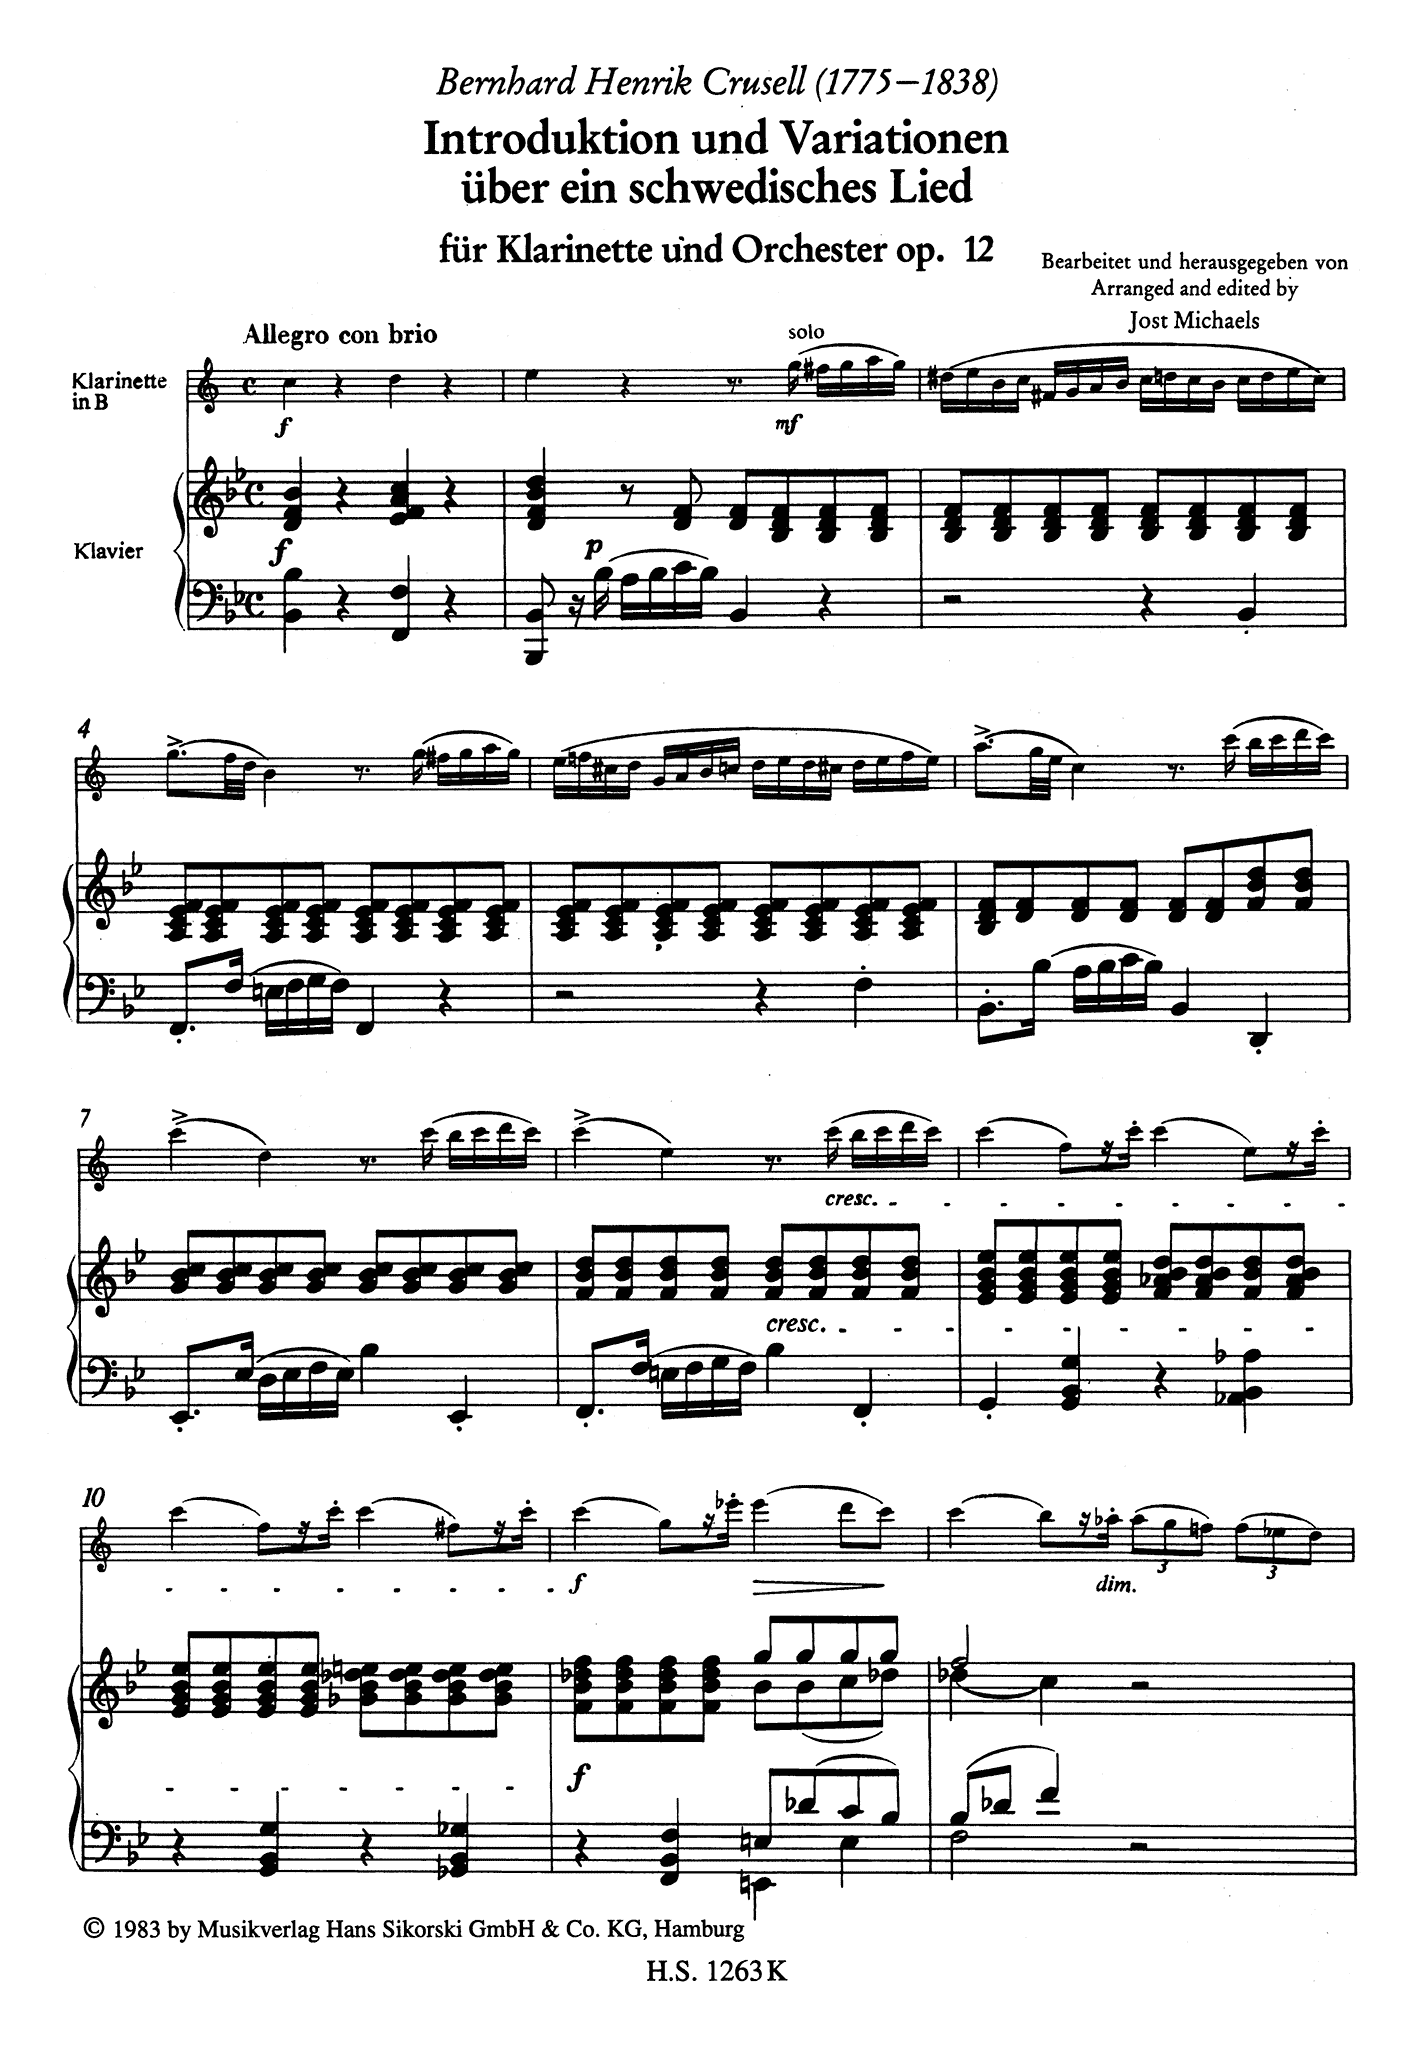 Crusell Introduction et Air suedois, Op. 12 Score